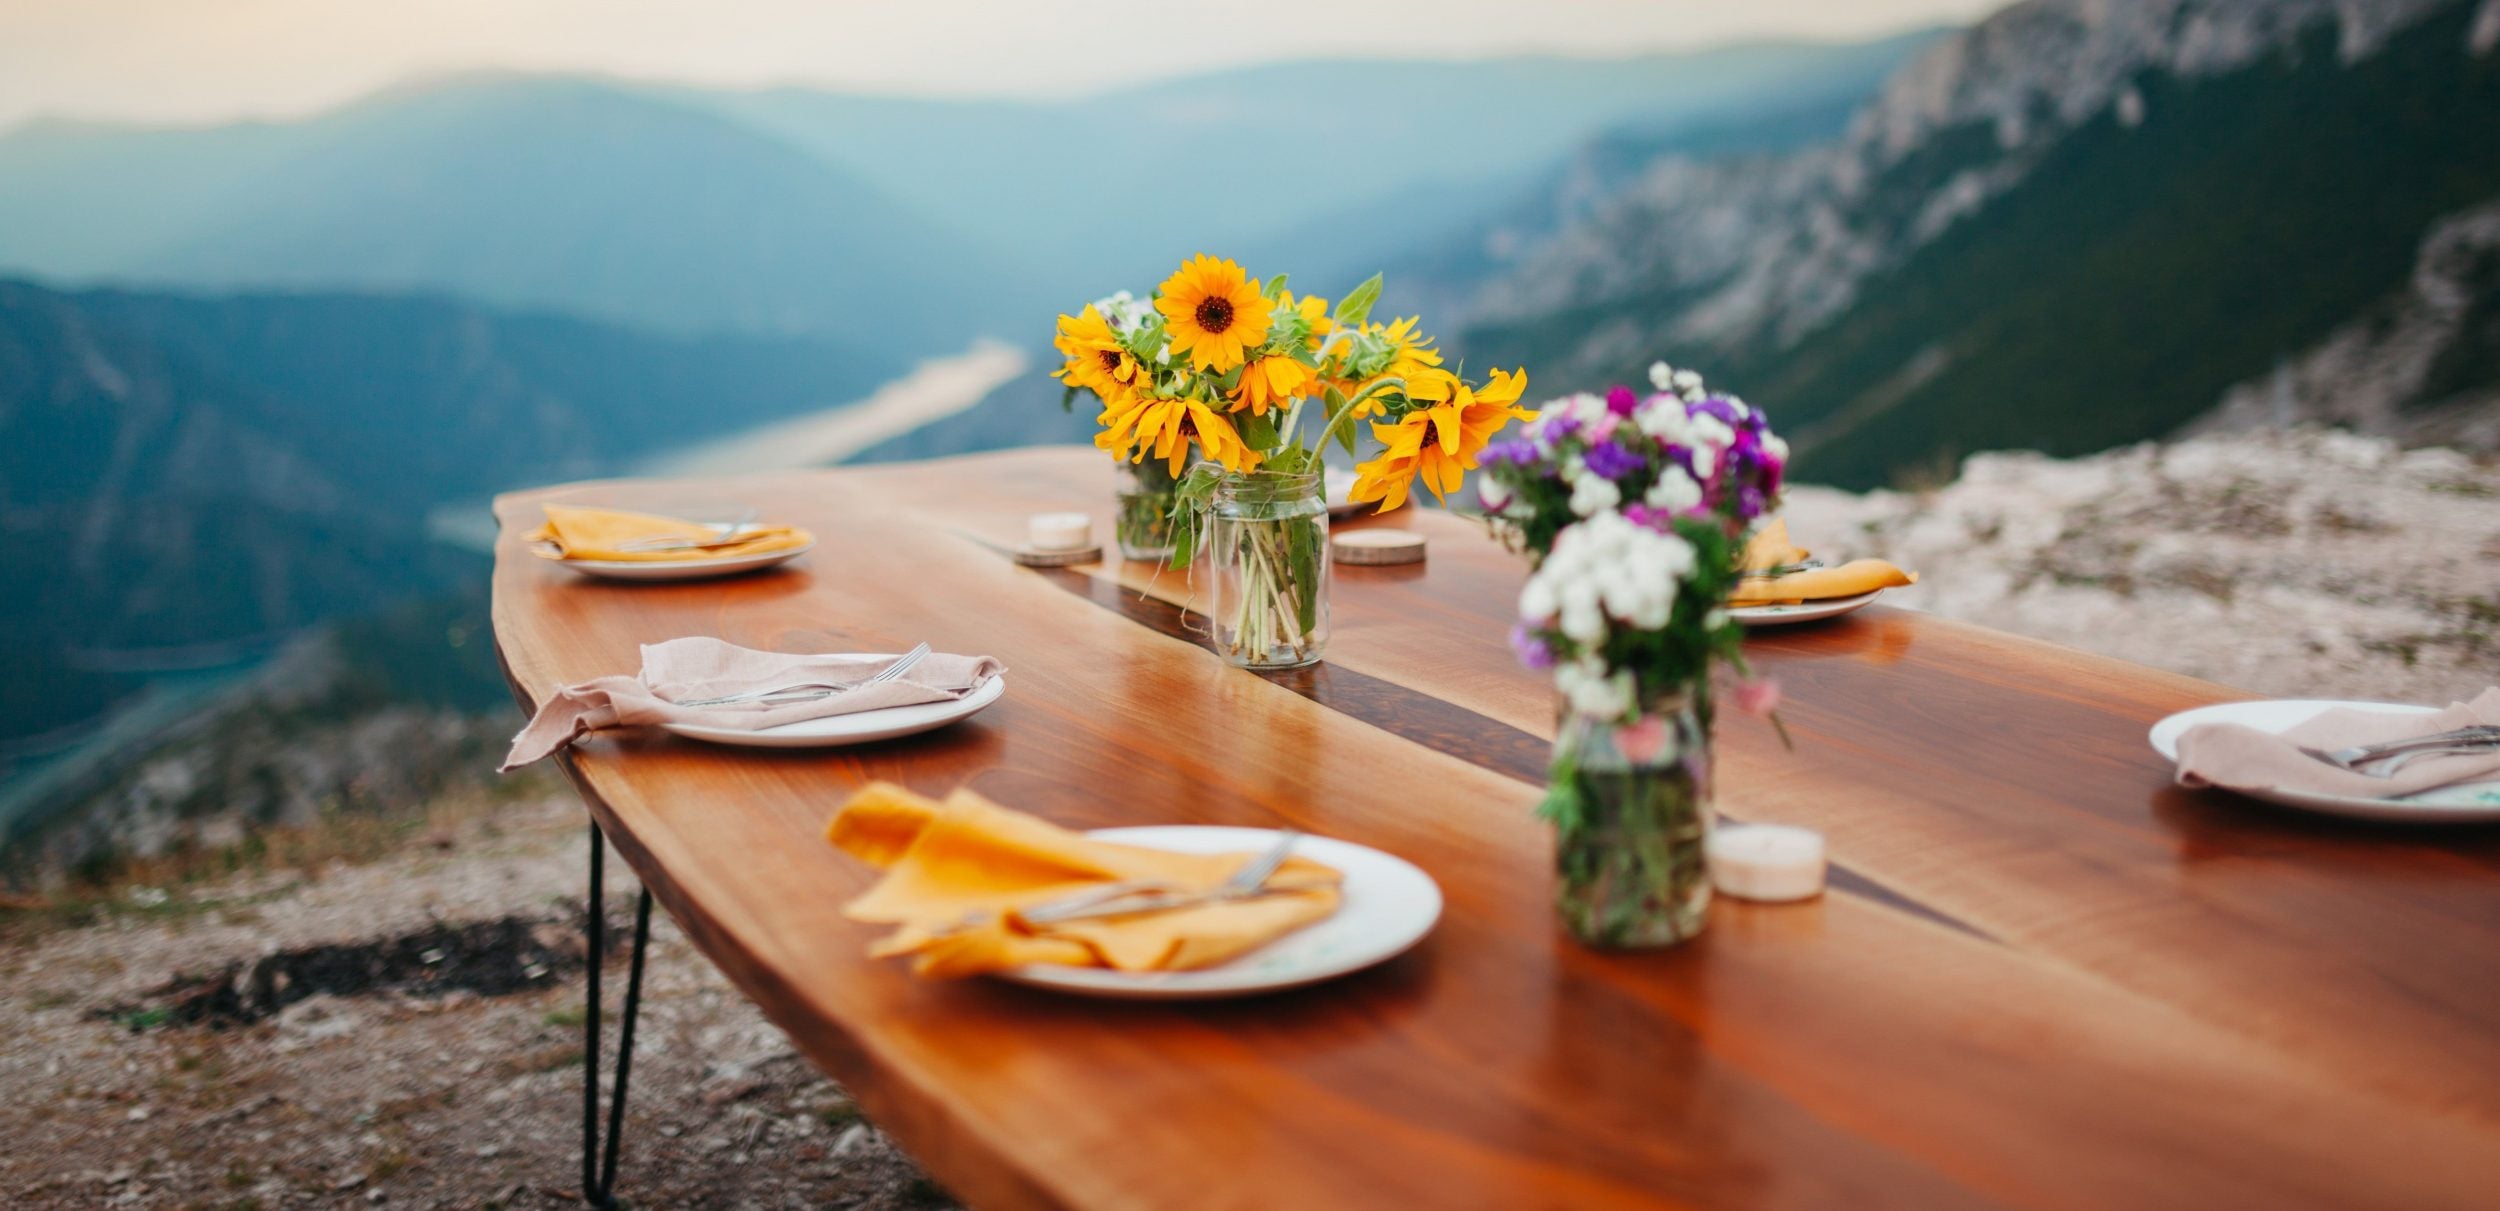 Table setting in the mountains with sunflowers for a thanksgiving buffet celebration